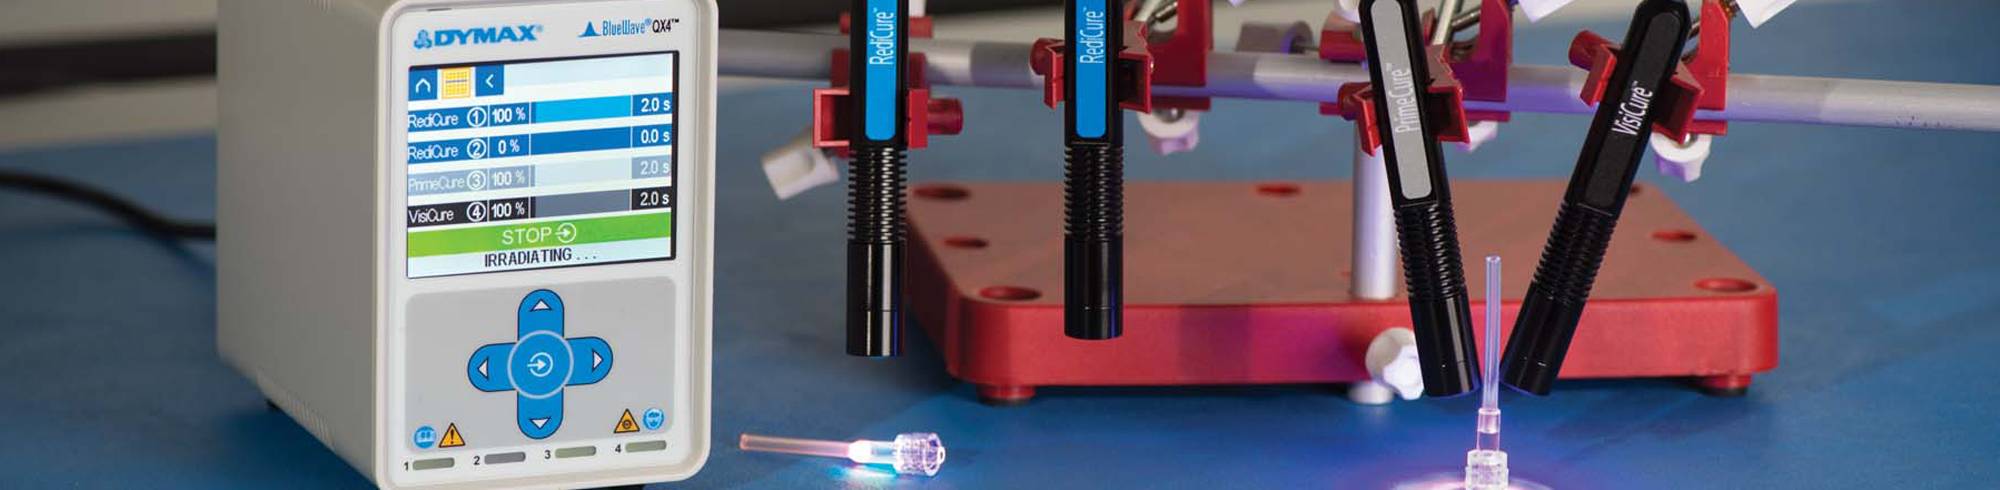 Dymax bench-top LED and UV Light-curing spot lamps